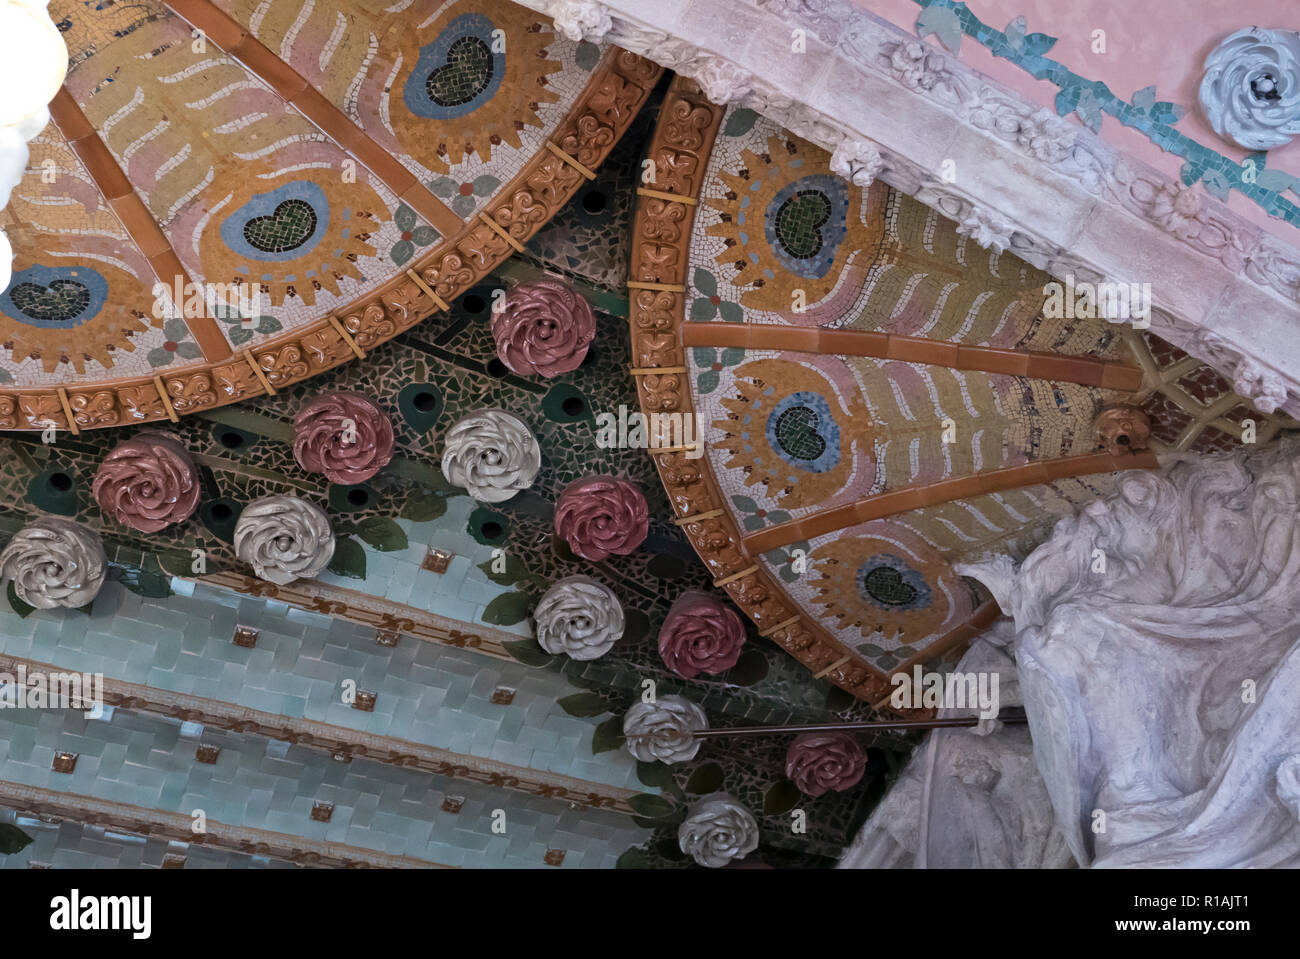 Roses decorations on the ceiling of the Palau De La Musica, Barcelona, Spain Stock Photo